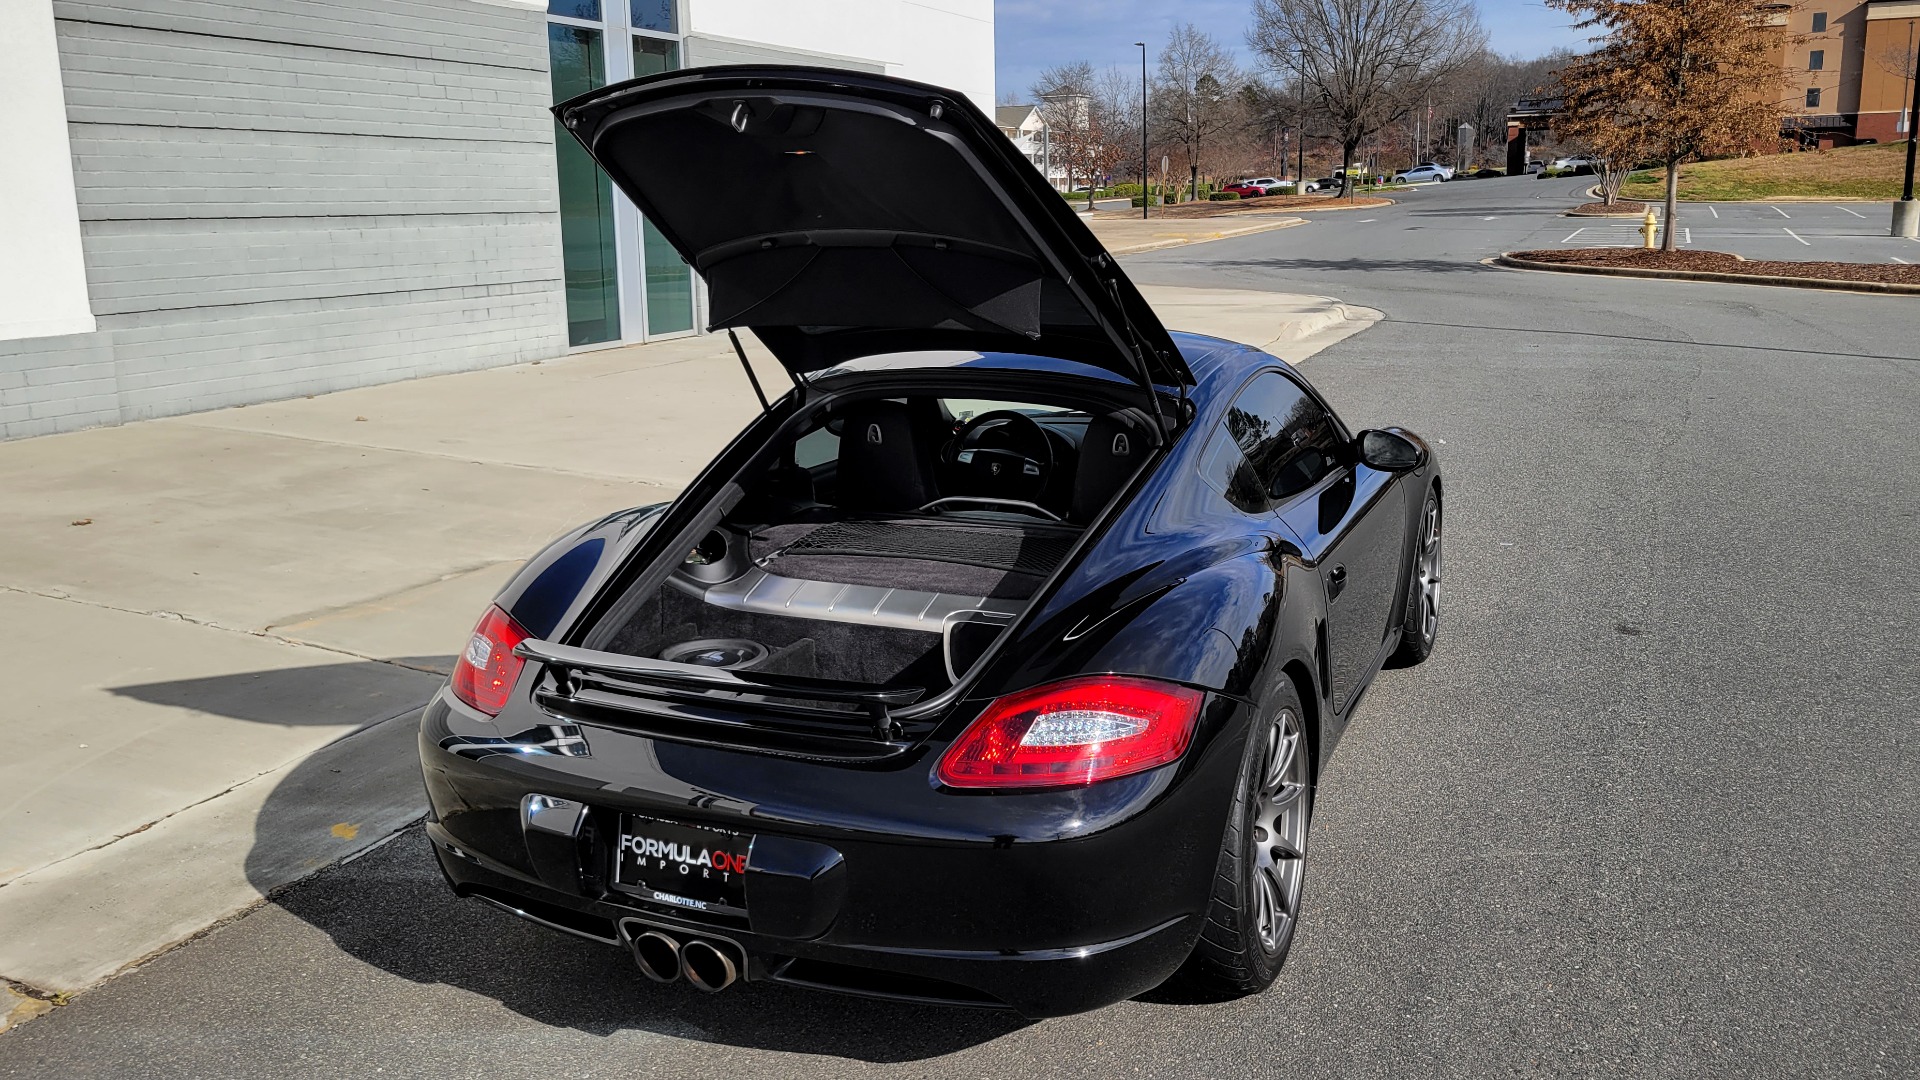 Used 2007 Porsche CAYMAN COUPE 2.7L / 5-SPD MANUAL / HTD STS / AIR COND / JL AUDIO / BORLA EXH for sale Sold at Formula Imports in Charlotte NC 28227 25